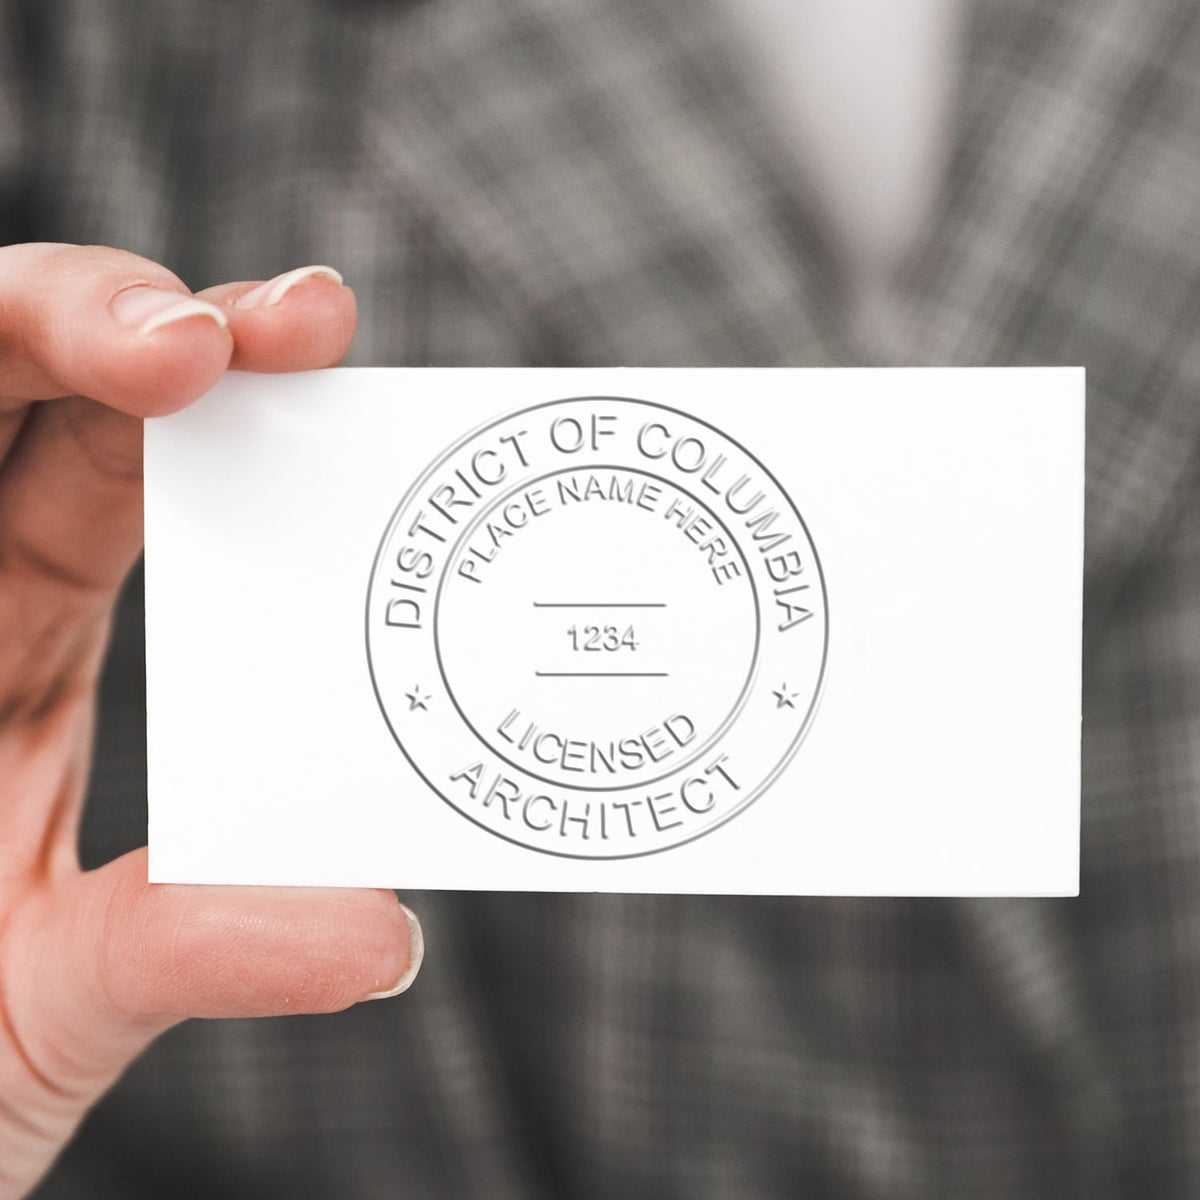 An in use photo of the Gift District of Columbia Architect Seal showing a sample imprint on a cardstock